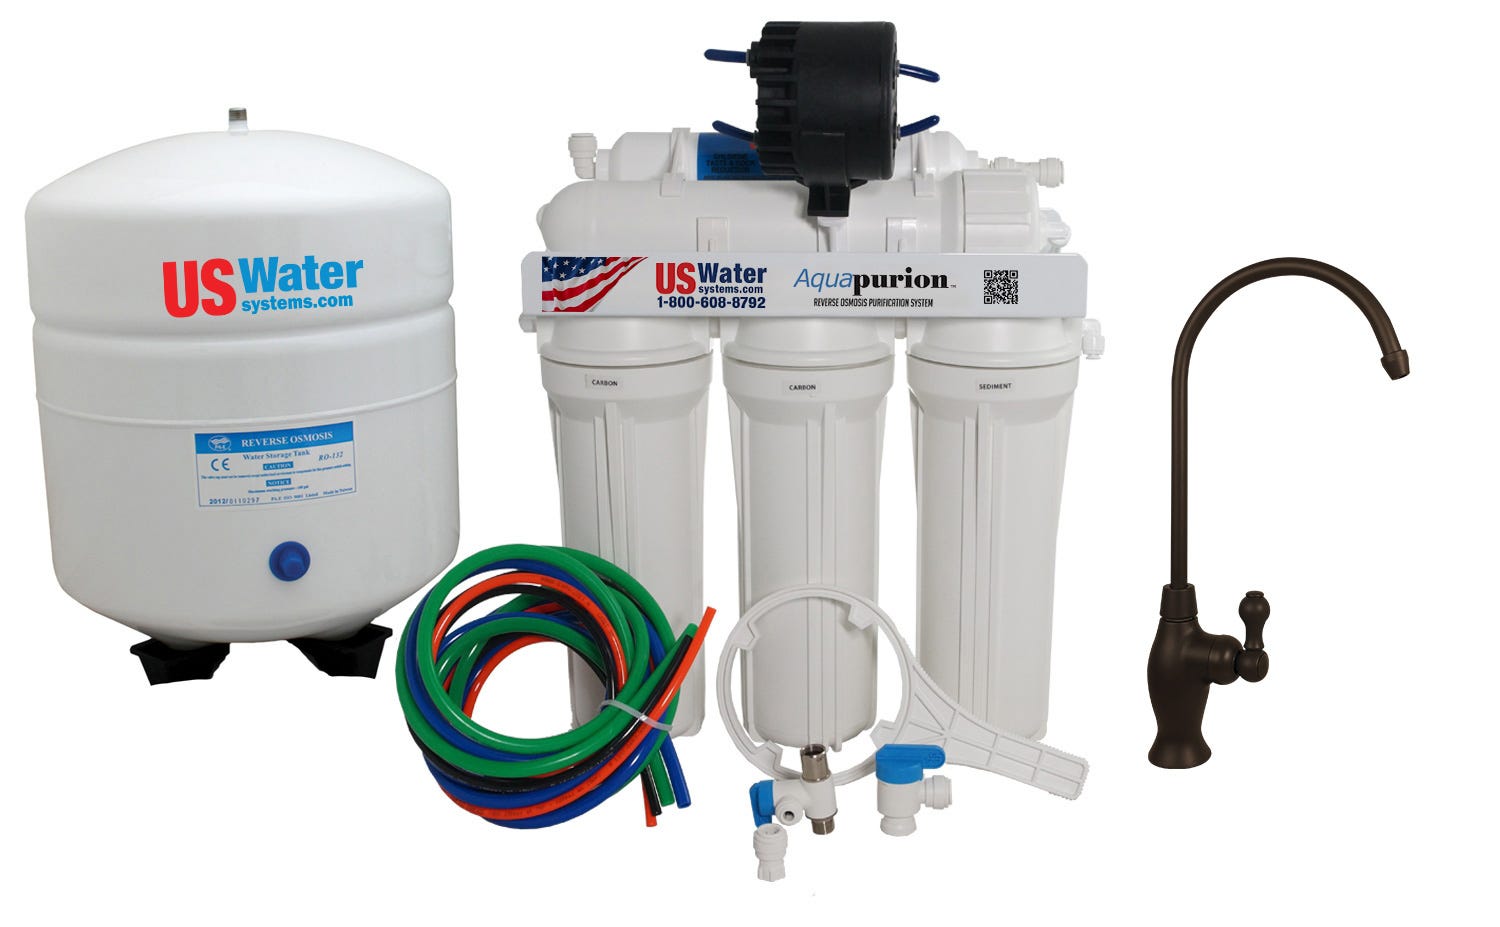 US Water Aquapurion 5-Stage Reverse Osmosis System With Enhanced Chloramine Removal